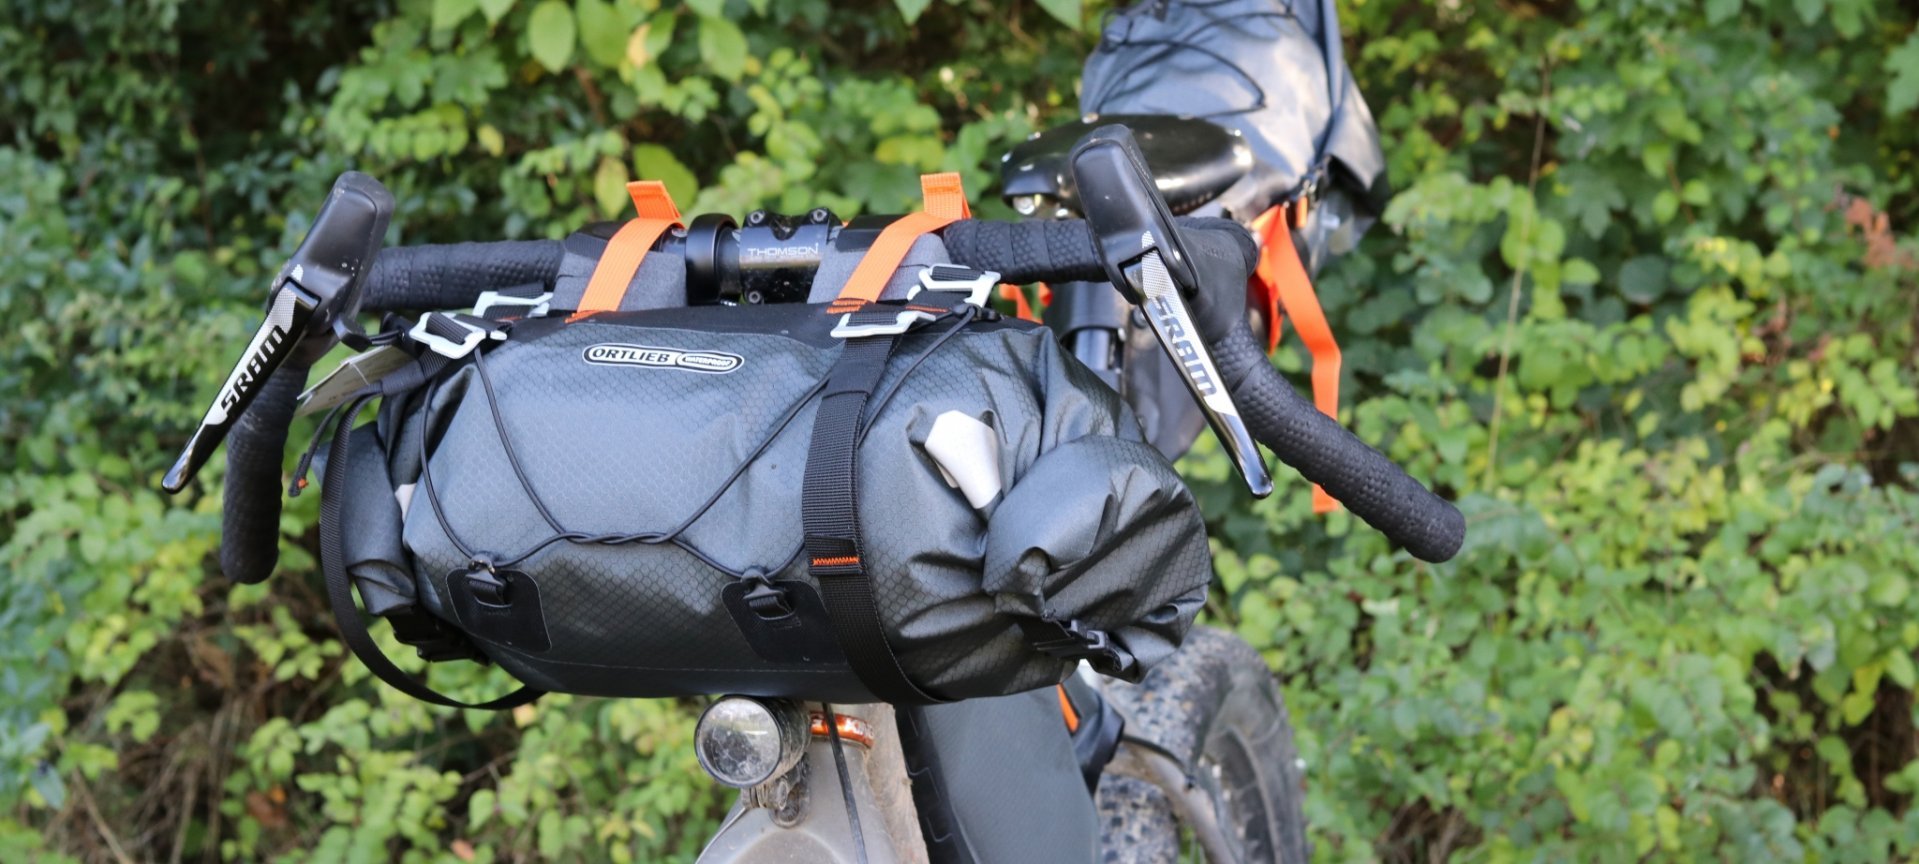 My tent and sleeping bag fit in the Handlebar-Pack perfectly.